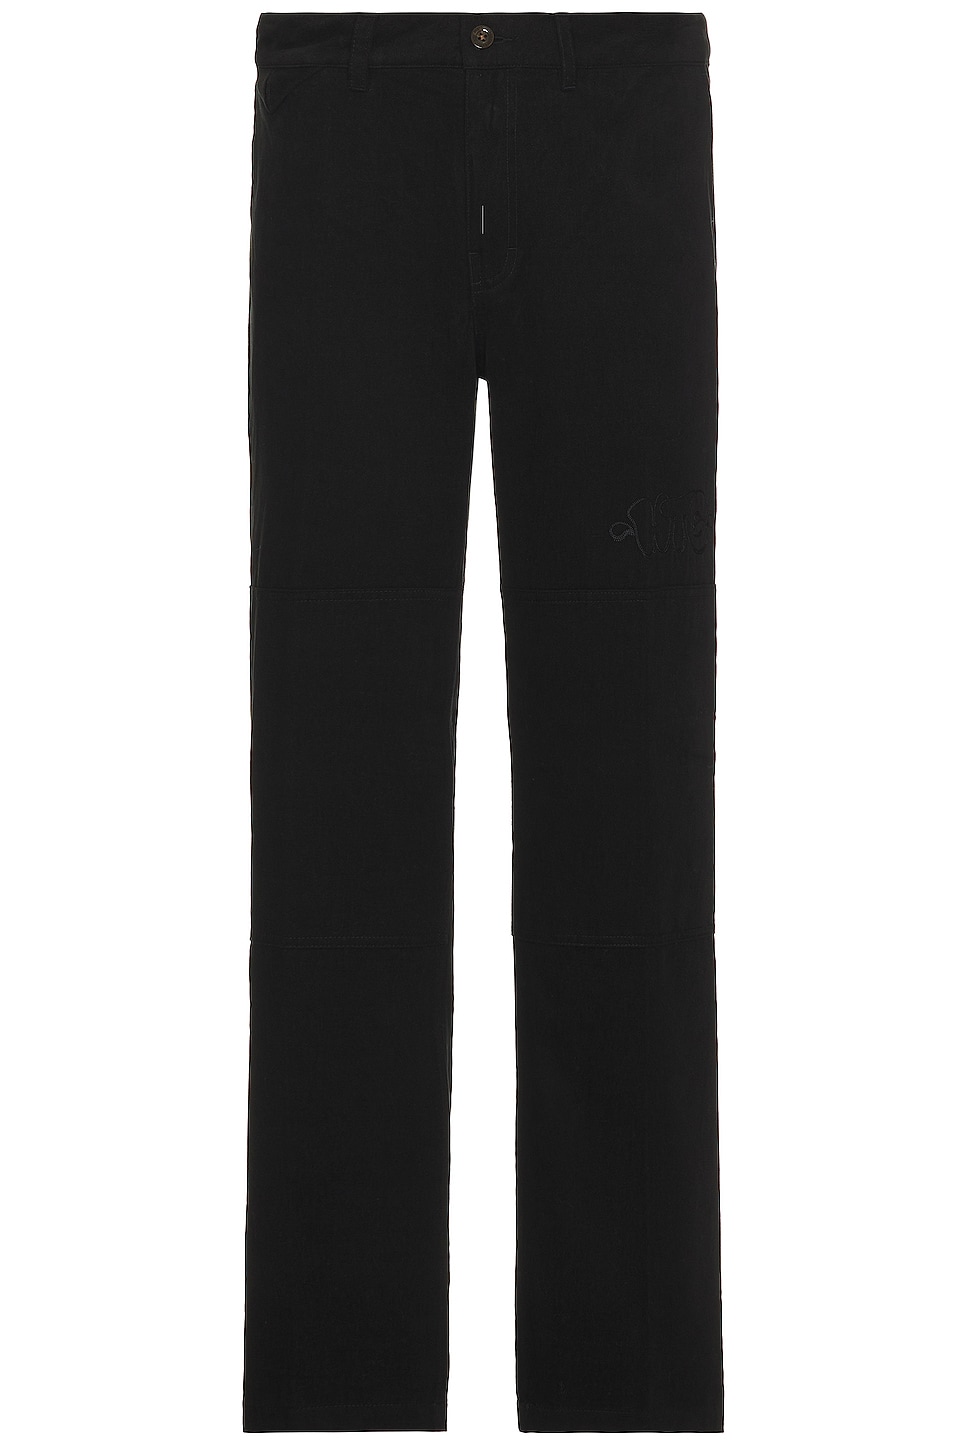 Image 1 of Honor The Gift Amp'd Chore Pants in Black